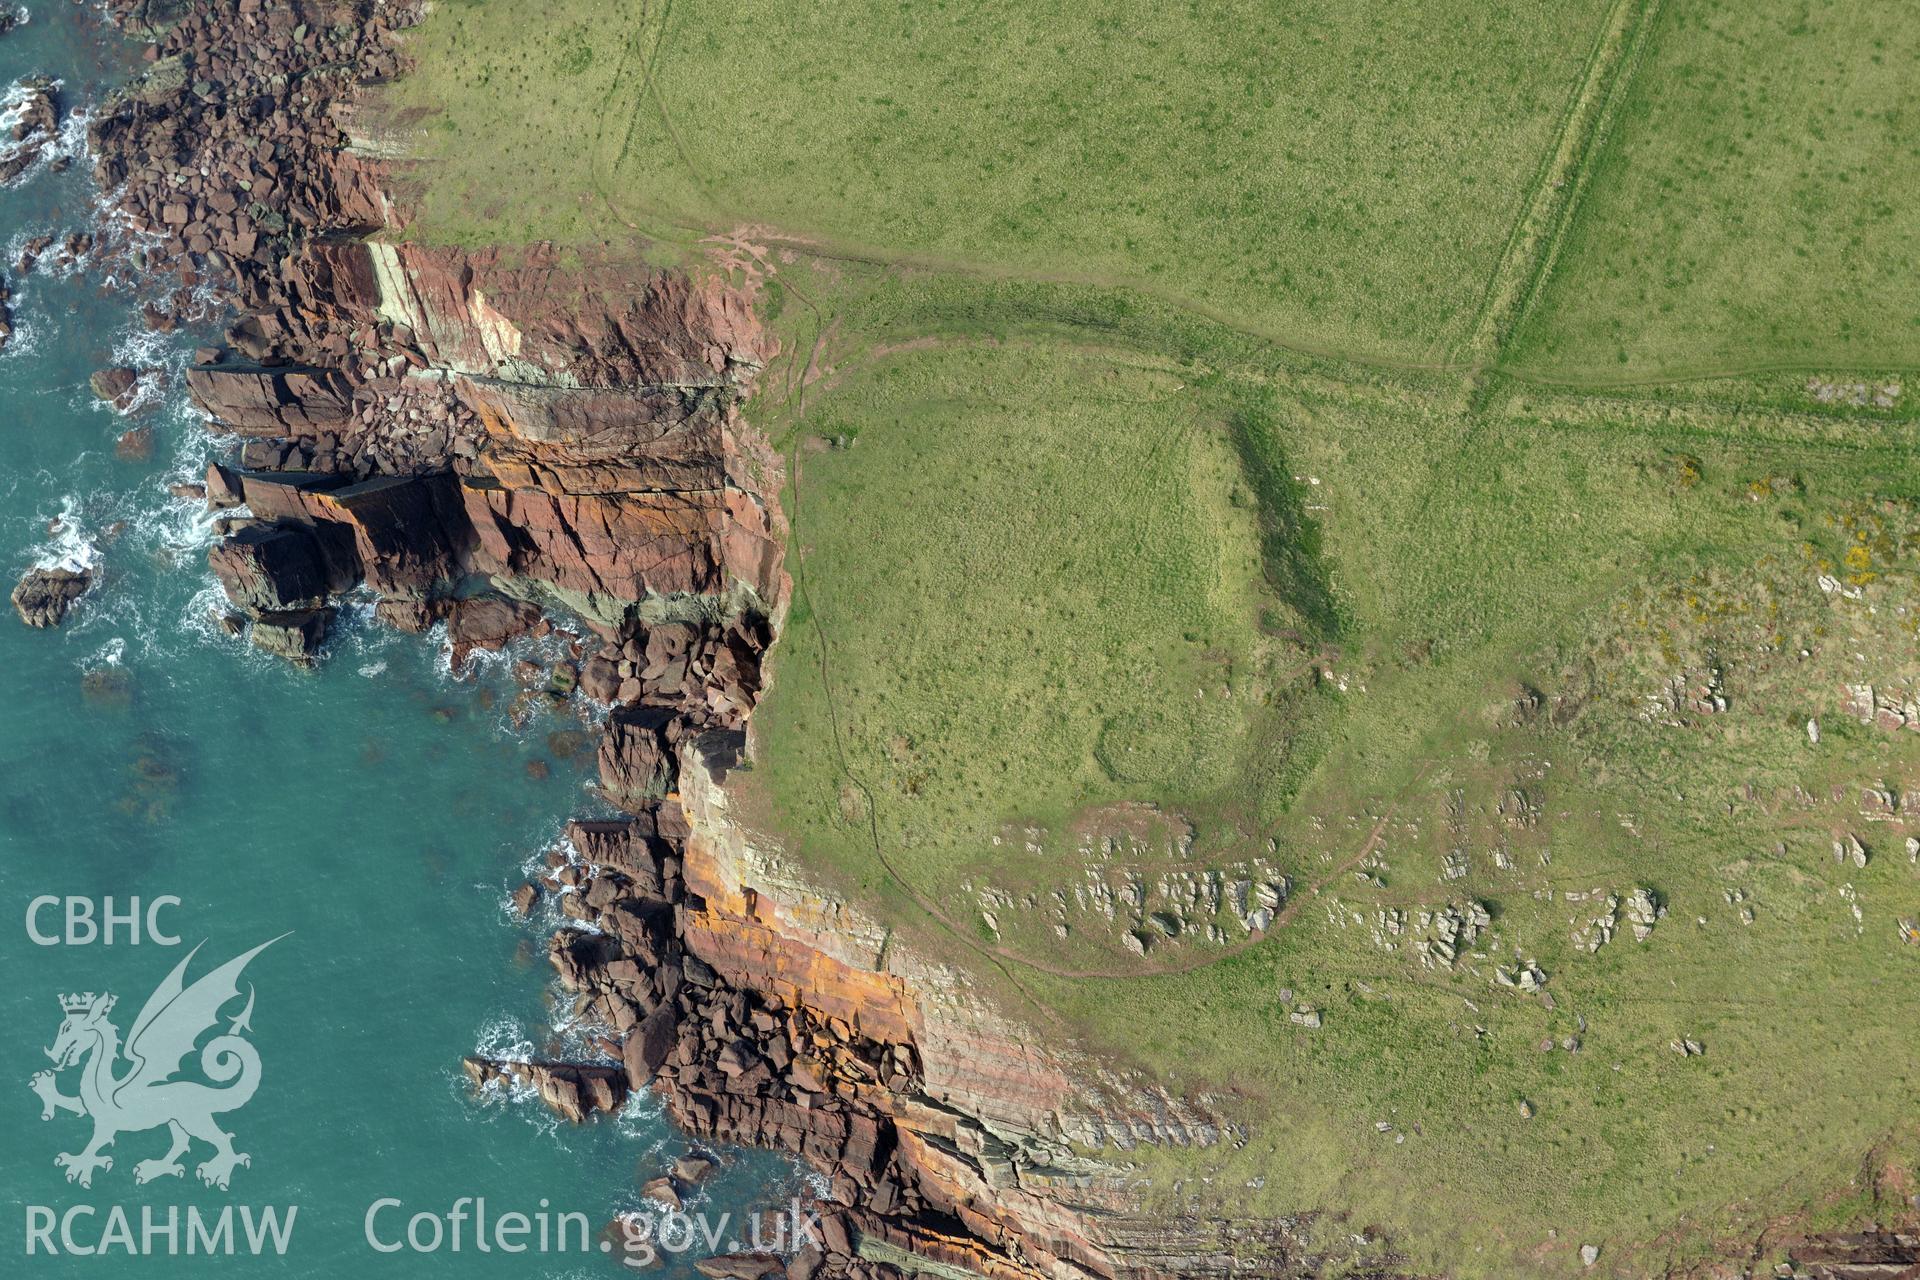 Aerial photography of West Pickard Bay promontory fort taken on 27th March 2017. Baseline aerial reconnaissance survey for the CHERISH Project. ? Crown: CHERISH PROJECT 2019. Produced with EU funds through the Ireland Wales Co-operation Programme 2014-2020. All material made freely available through the Open Government Licence.